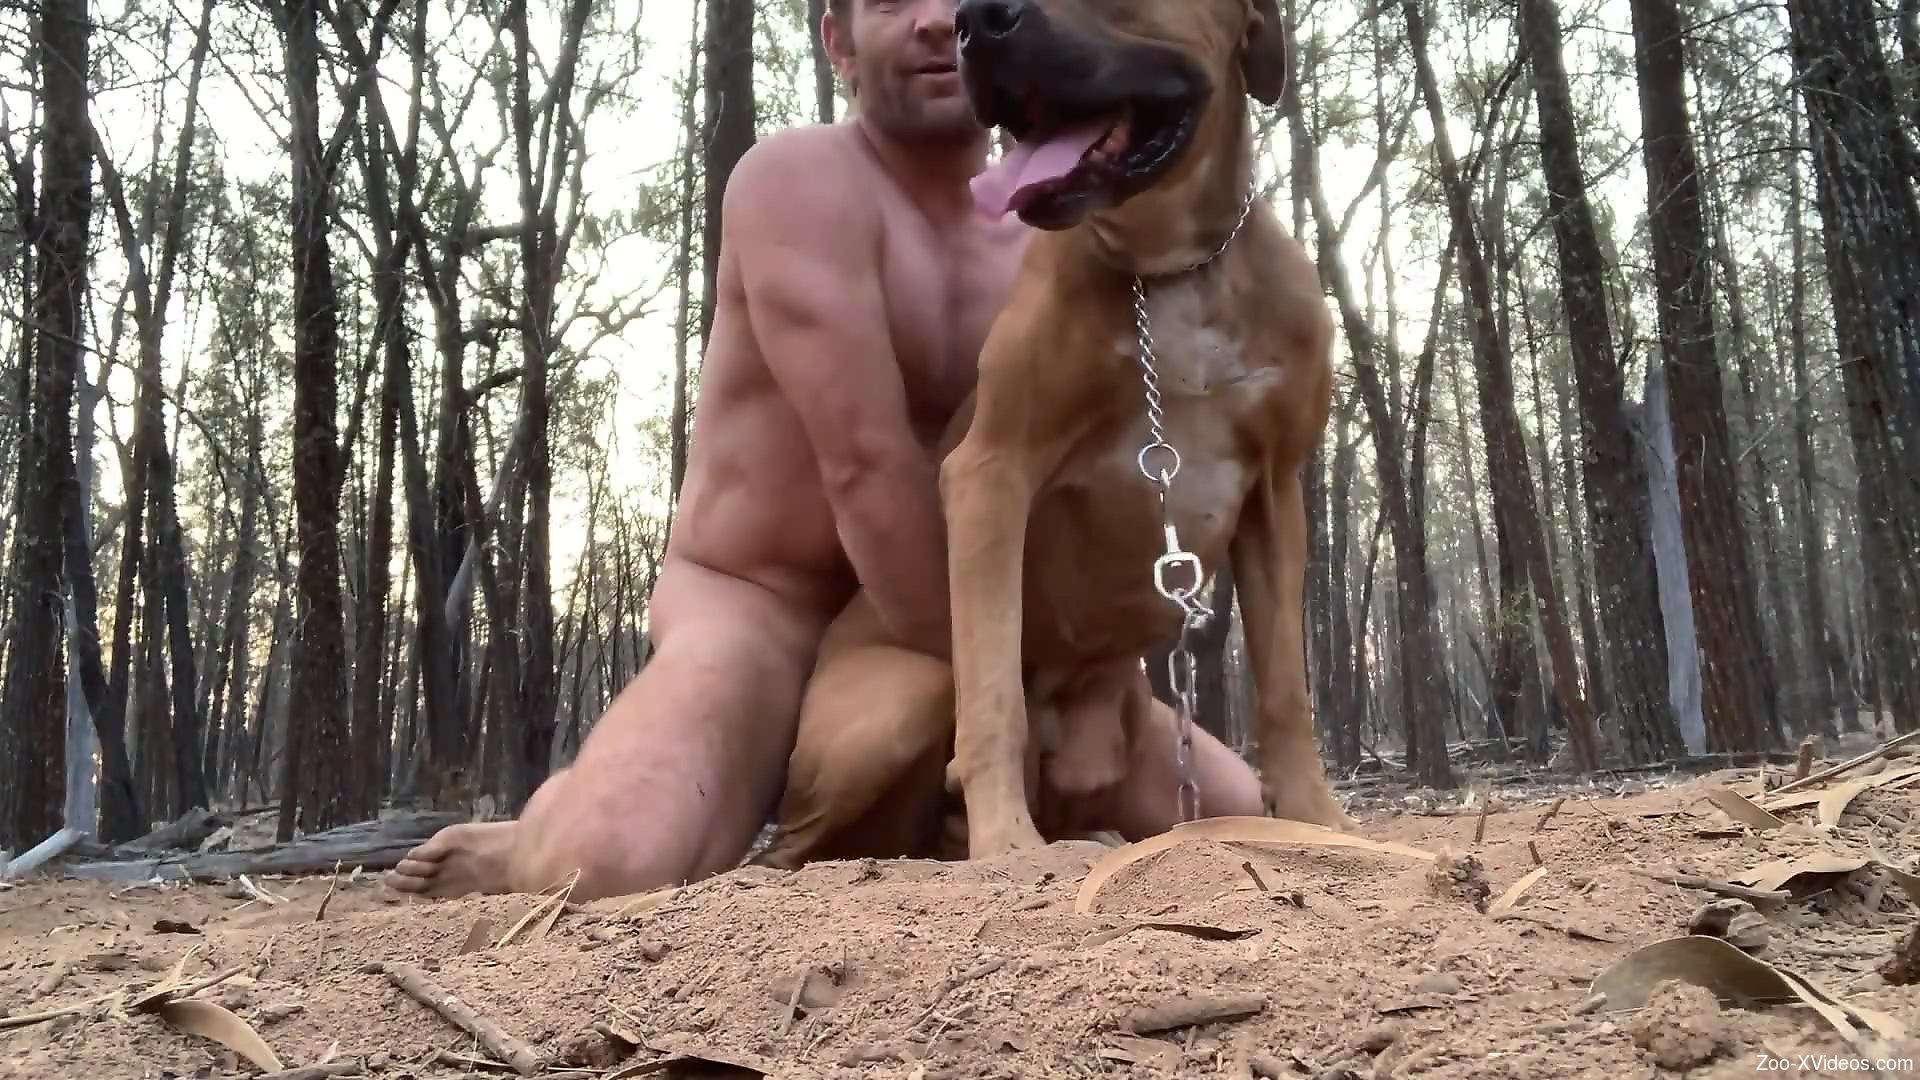 Guy Fucking A Pitbull - Muscular dude fucking his sexy animal from behind